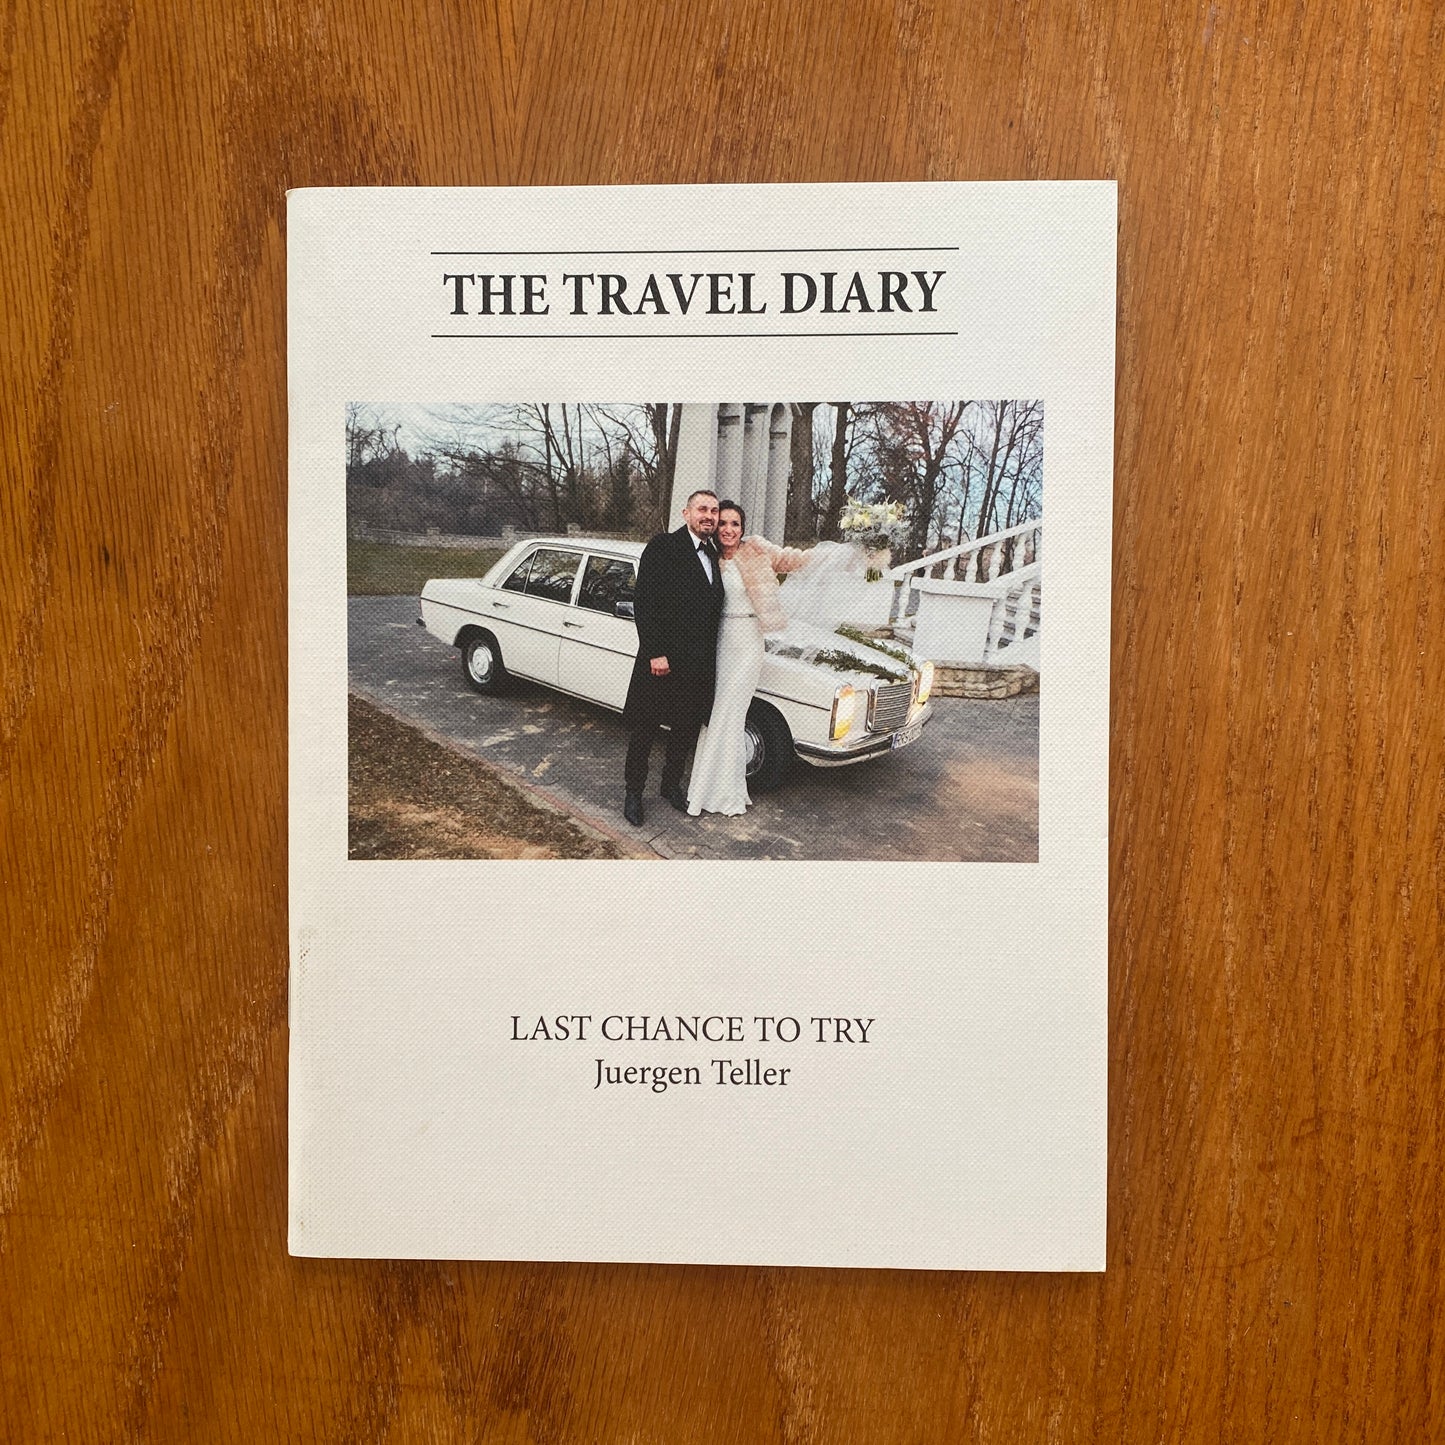 The Travel Diary: Last Chance To Try - Juergen Teller